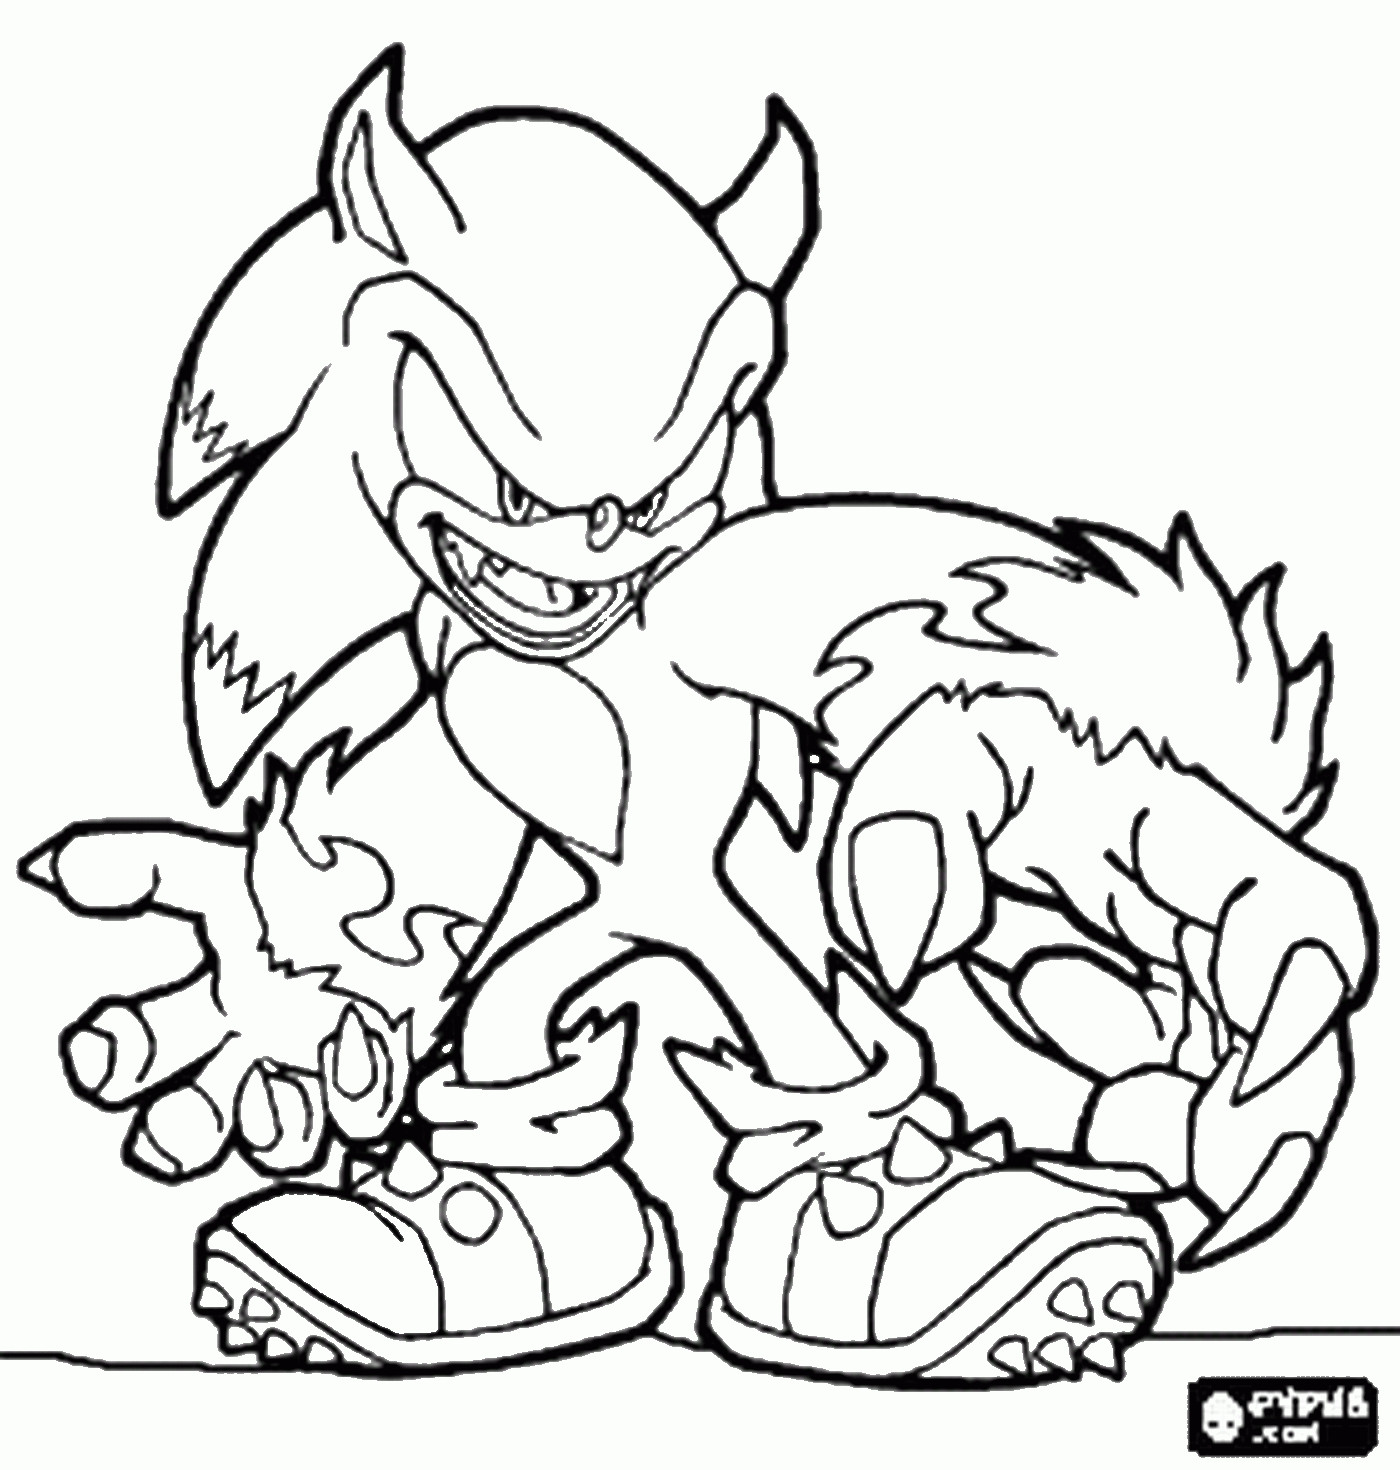 Sonic Coloring Pages Printable
 Sonic the Hedgehog Coloring Pages